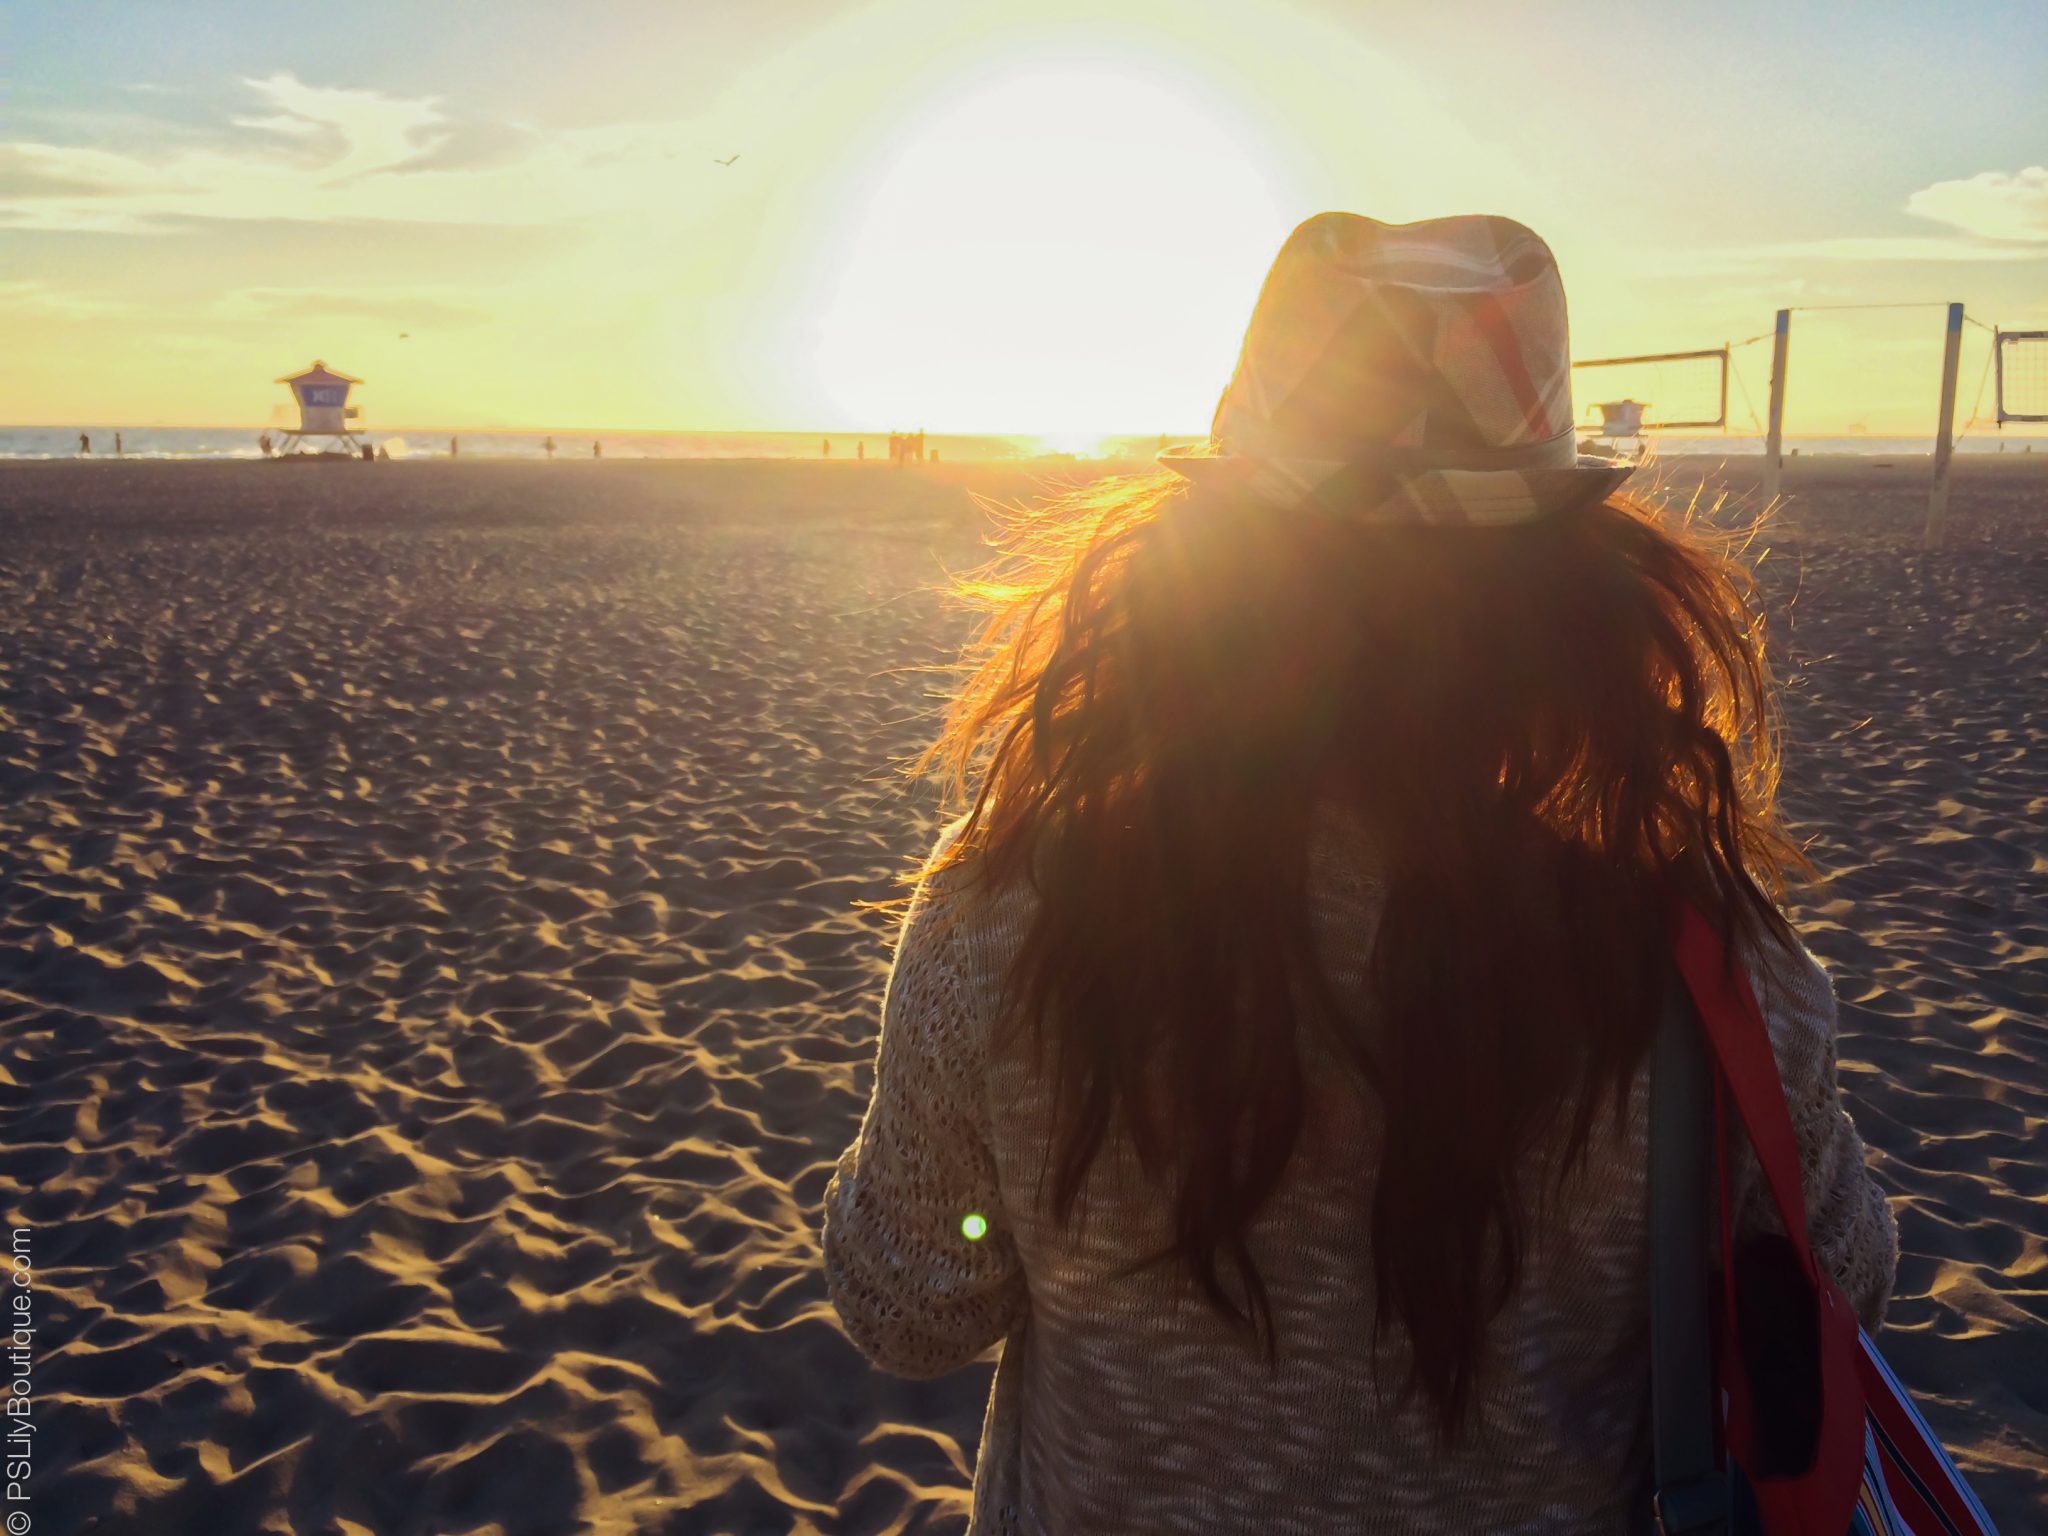 instagram-pslilyboutique-los-angeles-fashion-blogger-sunset-beach-life-hat-long-hair-10-23-15